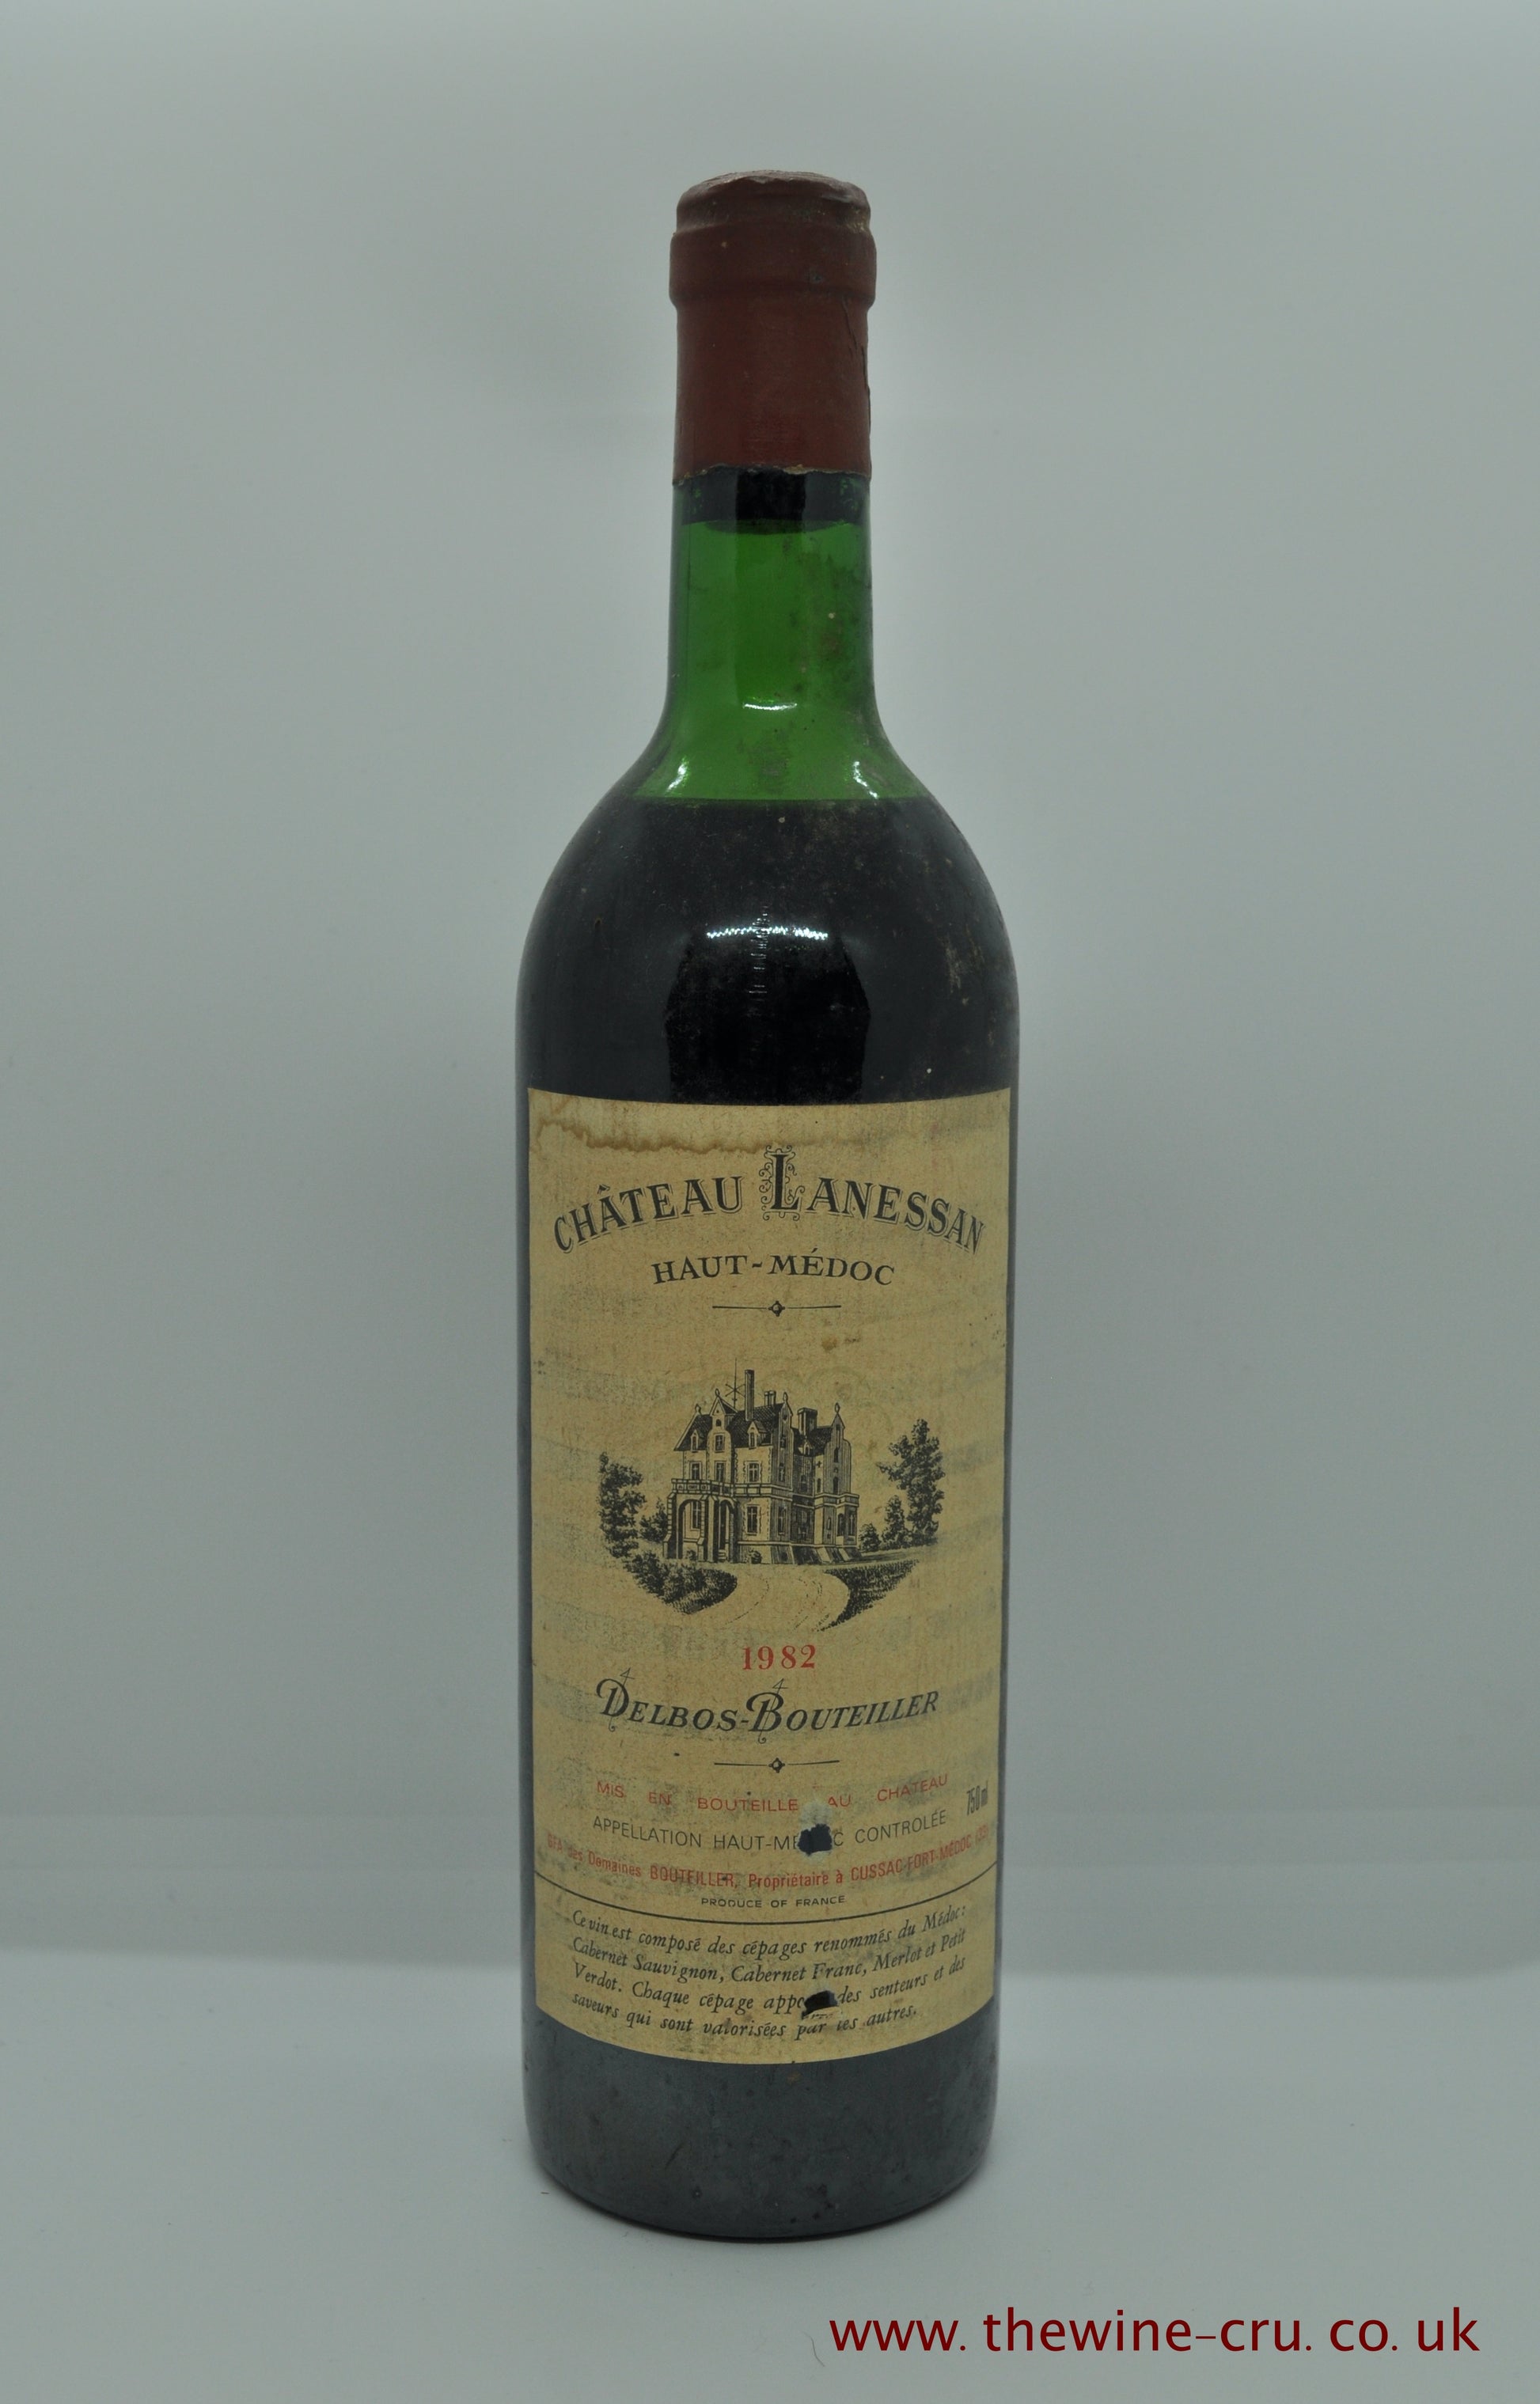 1982 vintage red wine. Chateau Lanessan 1982. France Bordeaux. Immediate delivery. Free local delivery.